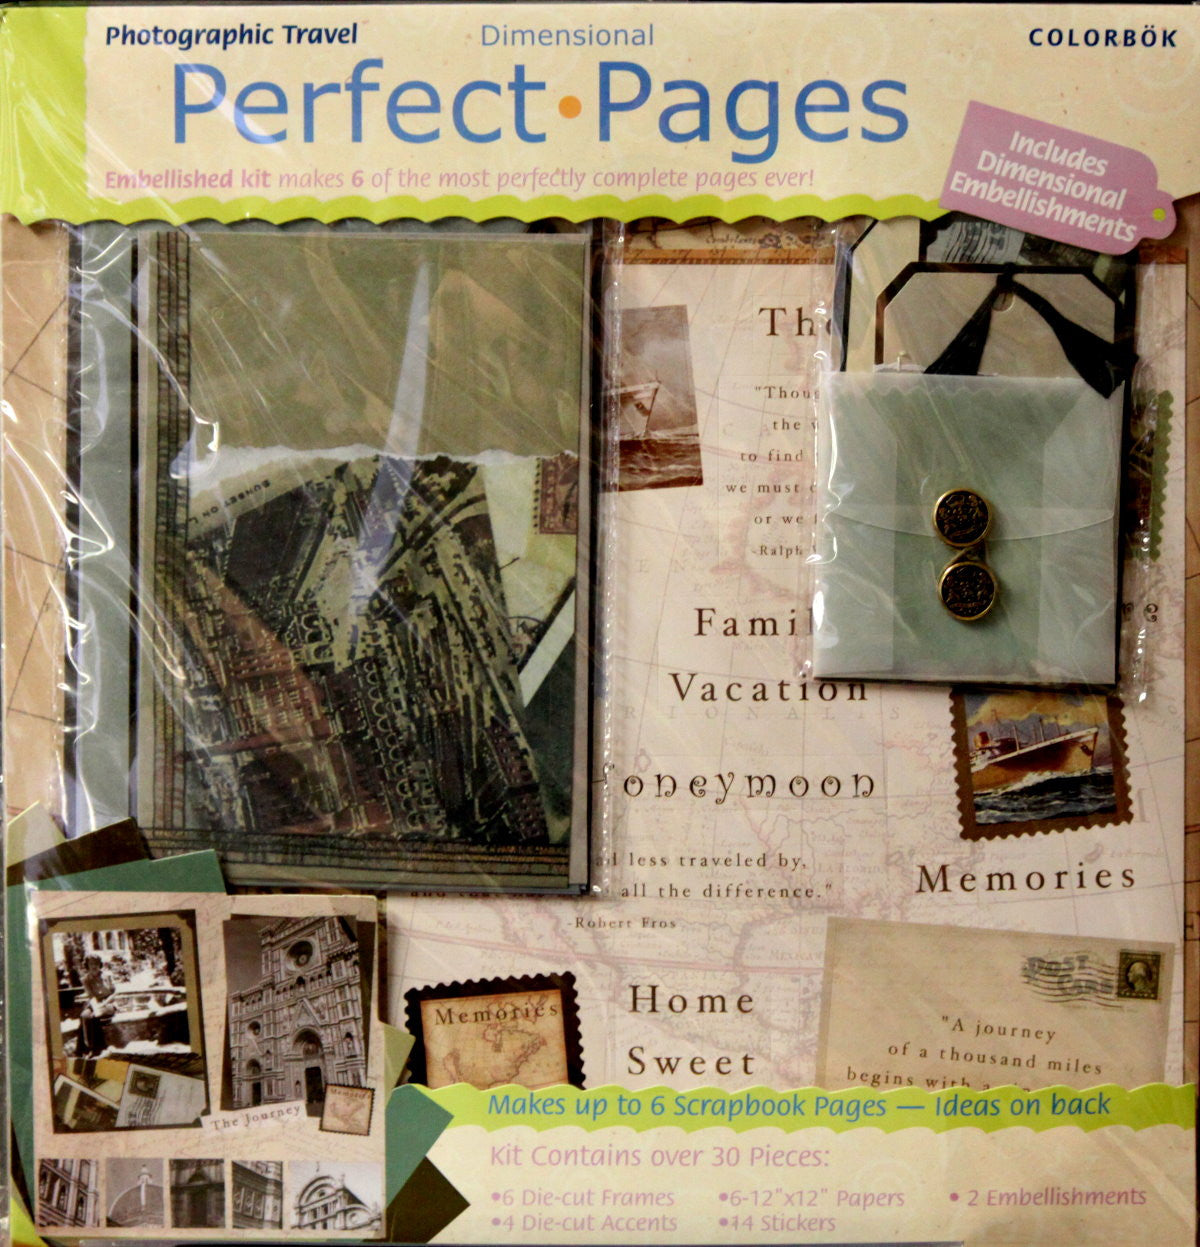 Colorbok Perfect Pages 12 x 12 Photographic Travel Dimensional Scrapbook Pages Kit - SCRAPBOOKFARE